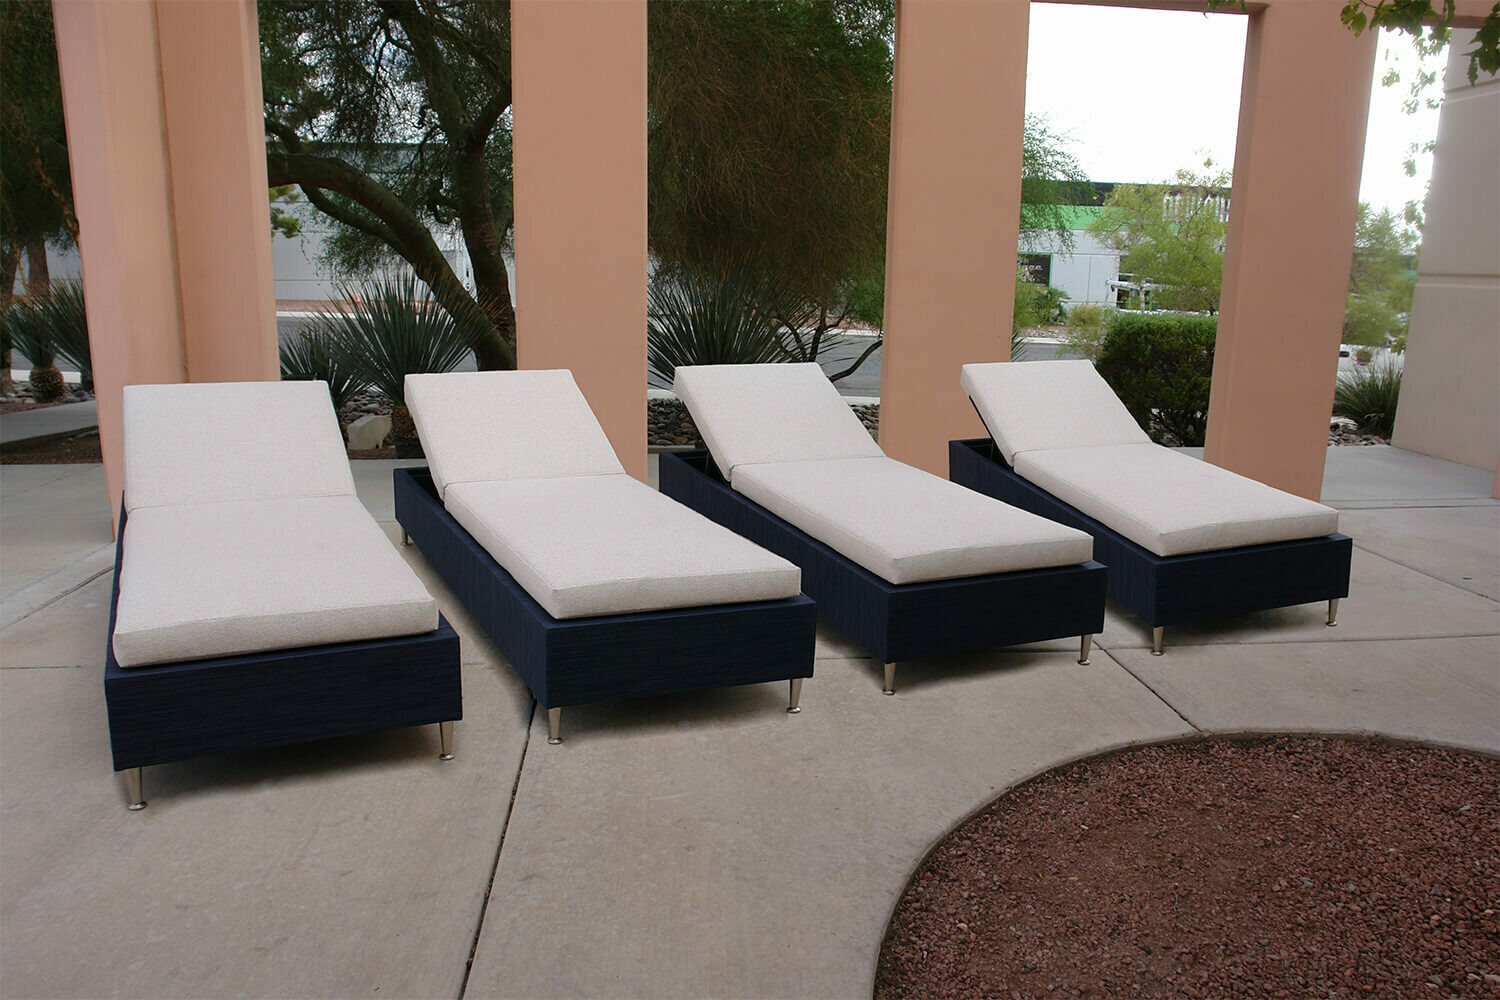 Resort Style 4 Piece Lounging Set-4 Adjustable Daybeds with Tight Seated Cushions